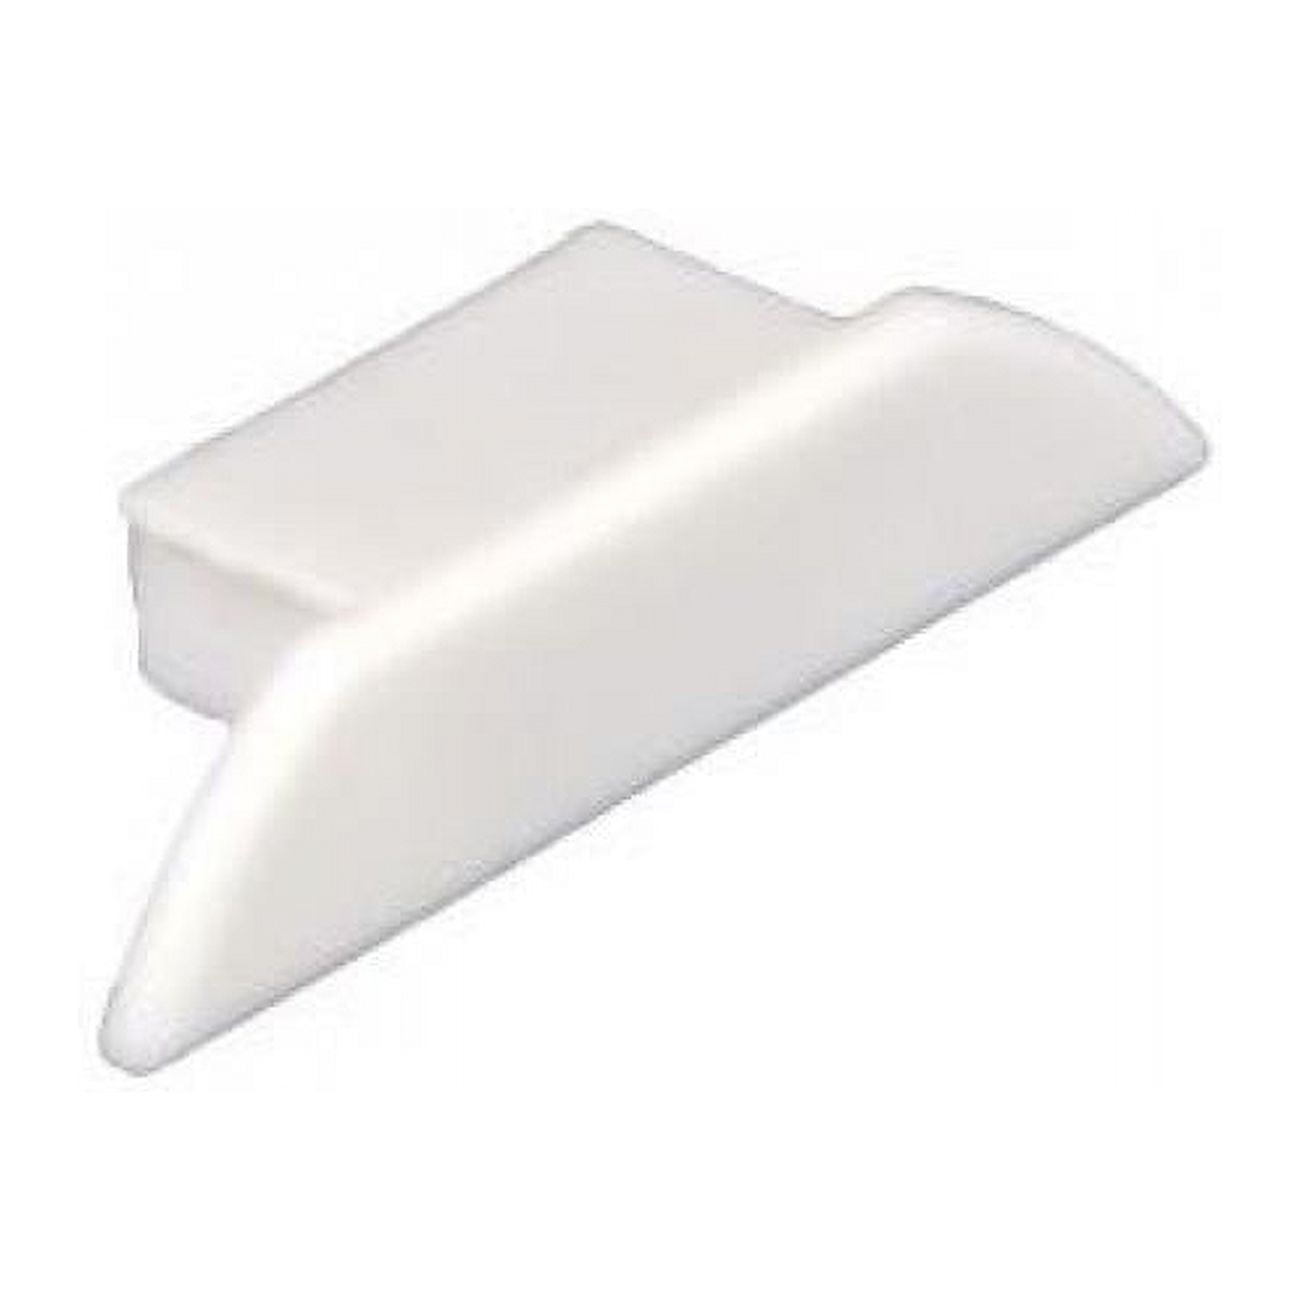 Pe-sstant-end Single Stant End Cap, White